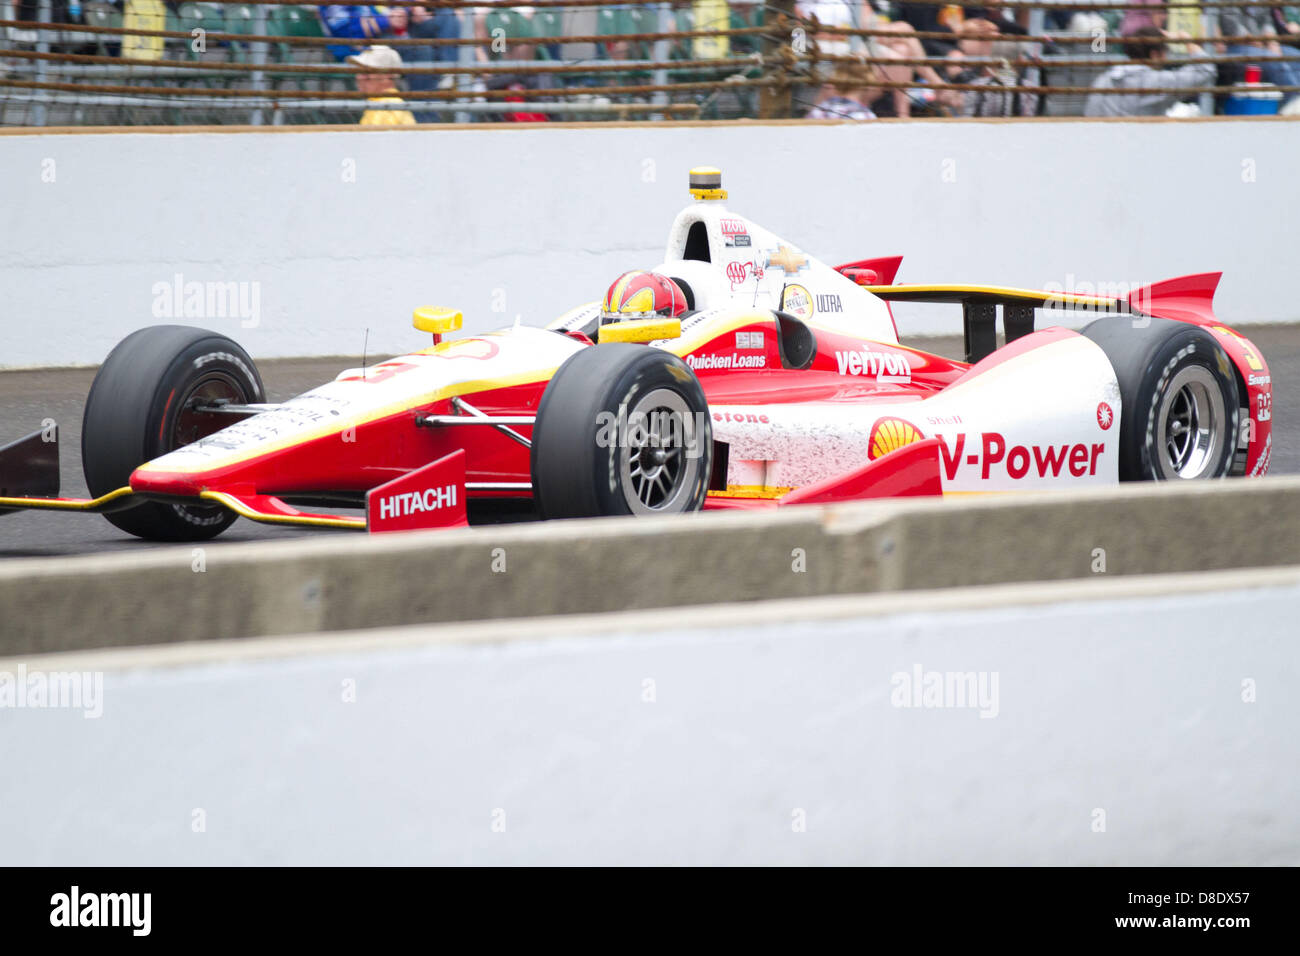 May 26, 2013 - Indianapolis, IN - May 26, 2013: Helio Castroneves (3) during the Indianapolis 500 at the Indianapolis Motor Speedway in Speedway, IN Stock Photo